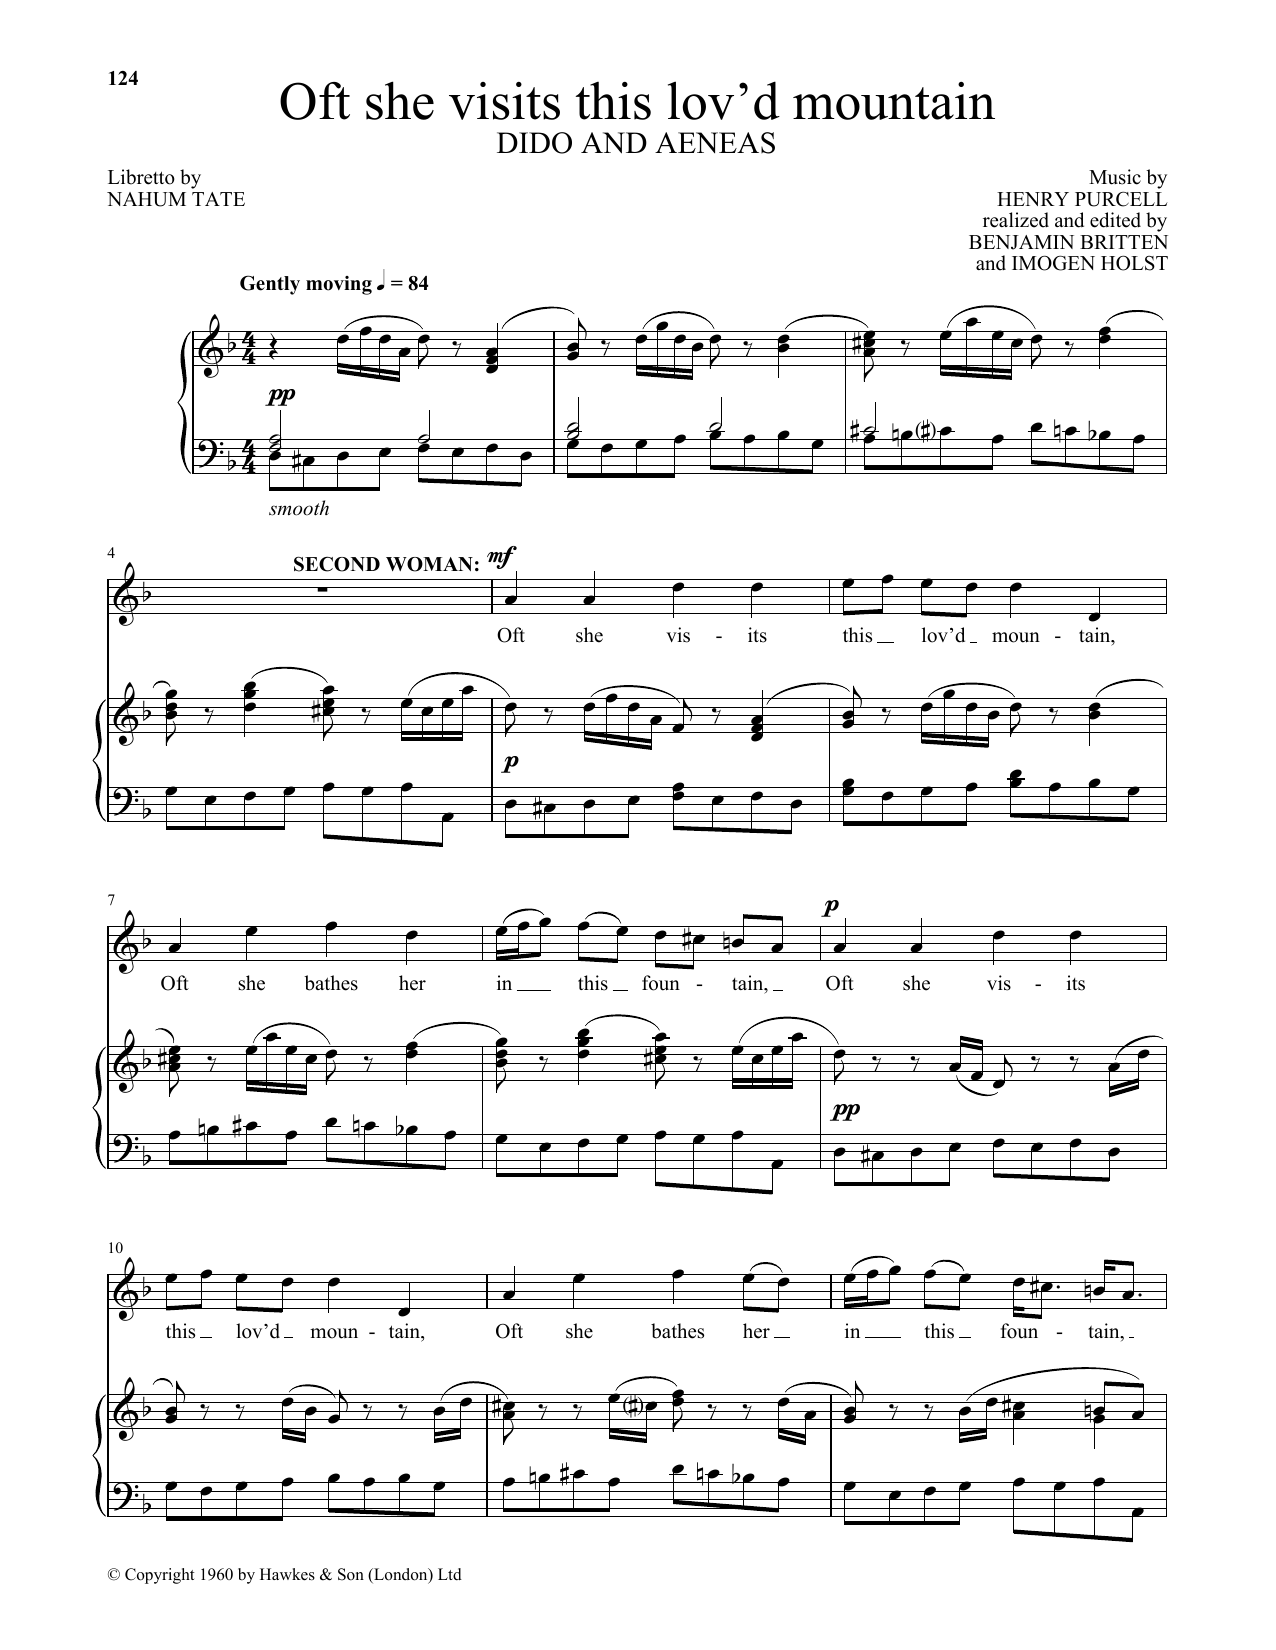 Download Henry Purcell Oft she visits this lov'd mountain (fro Sheet Music